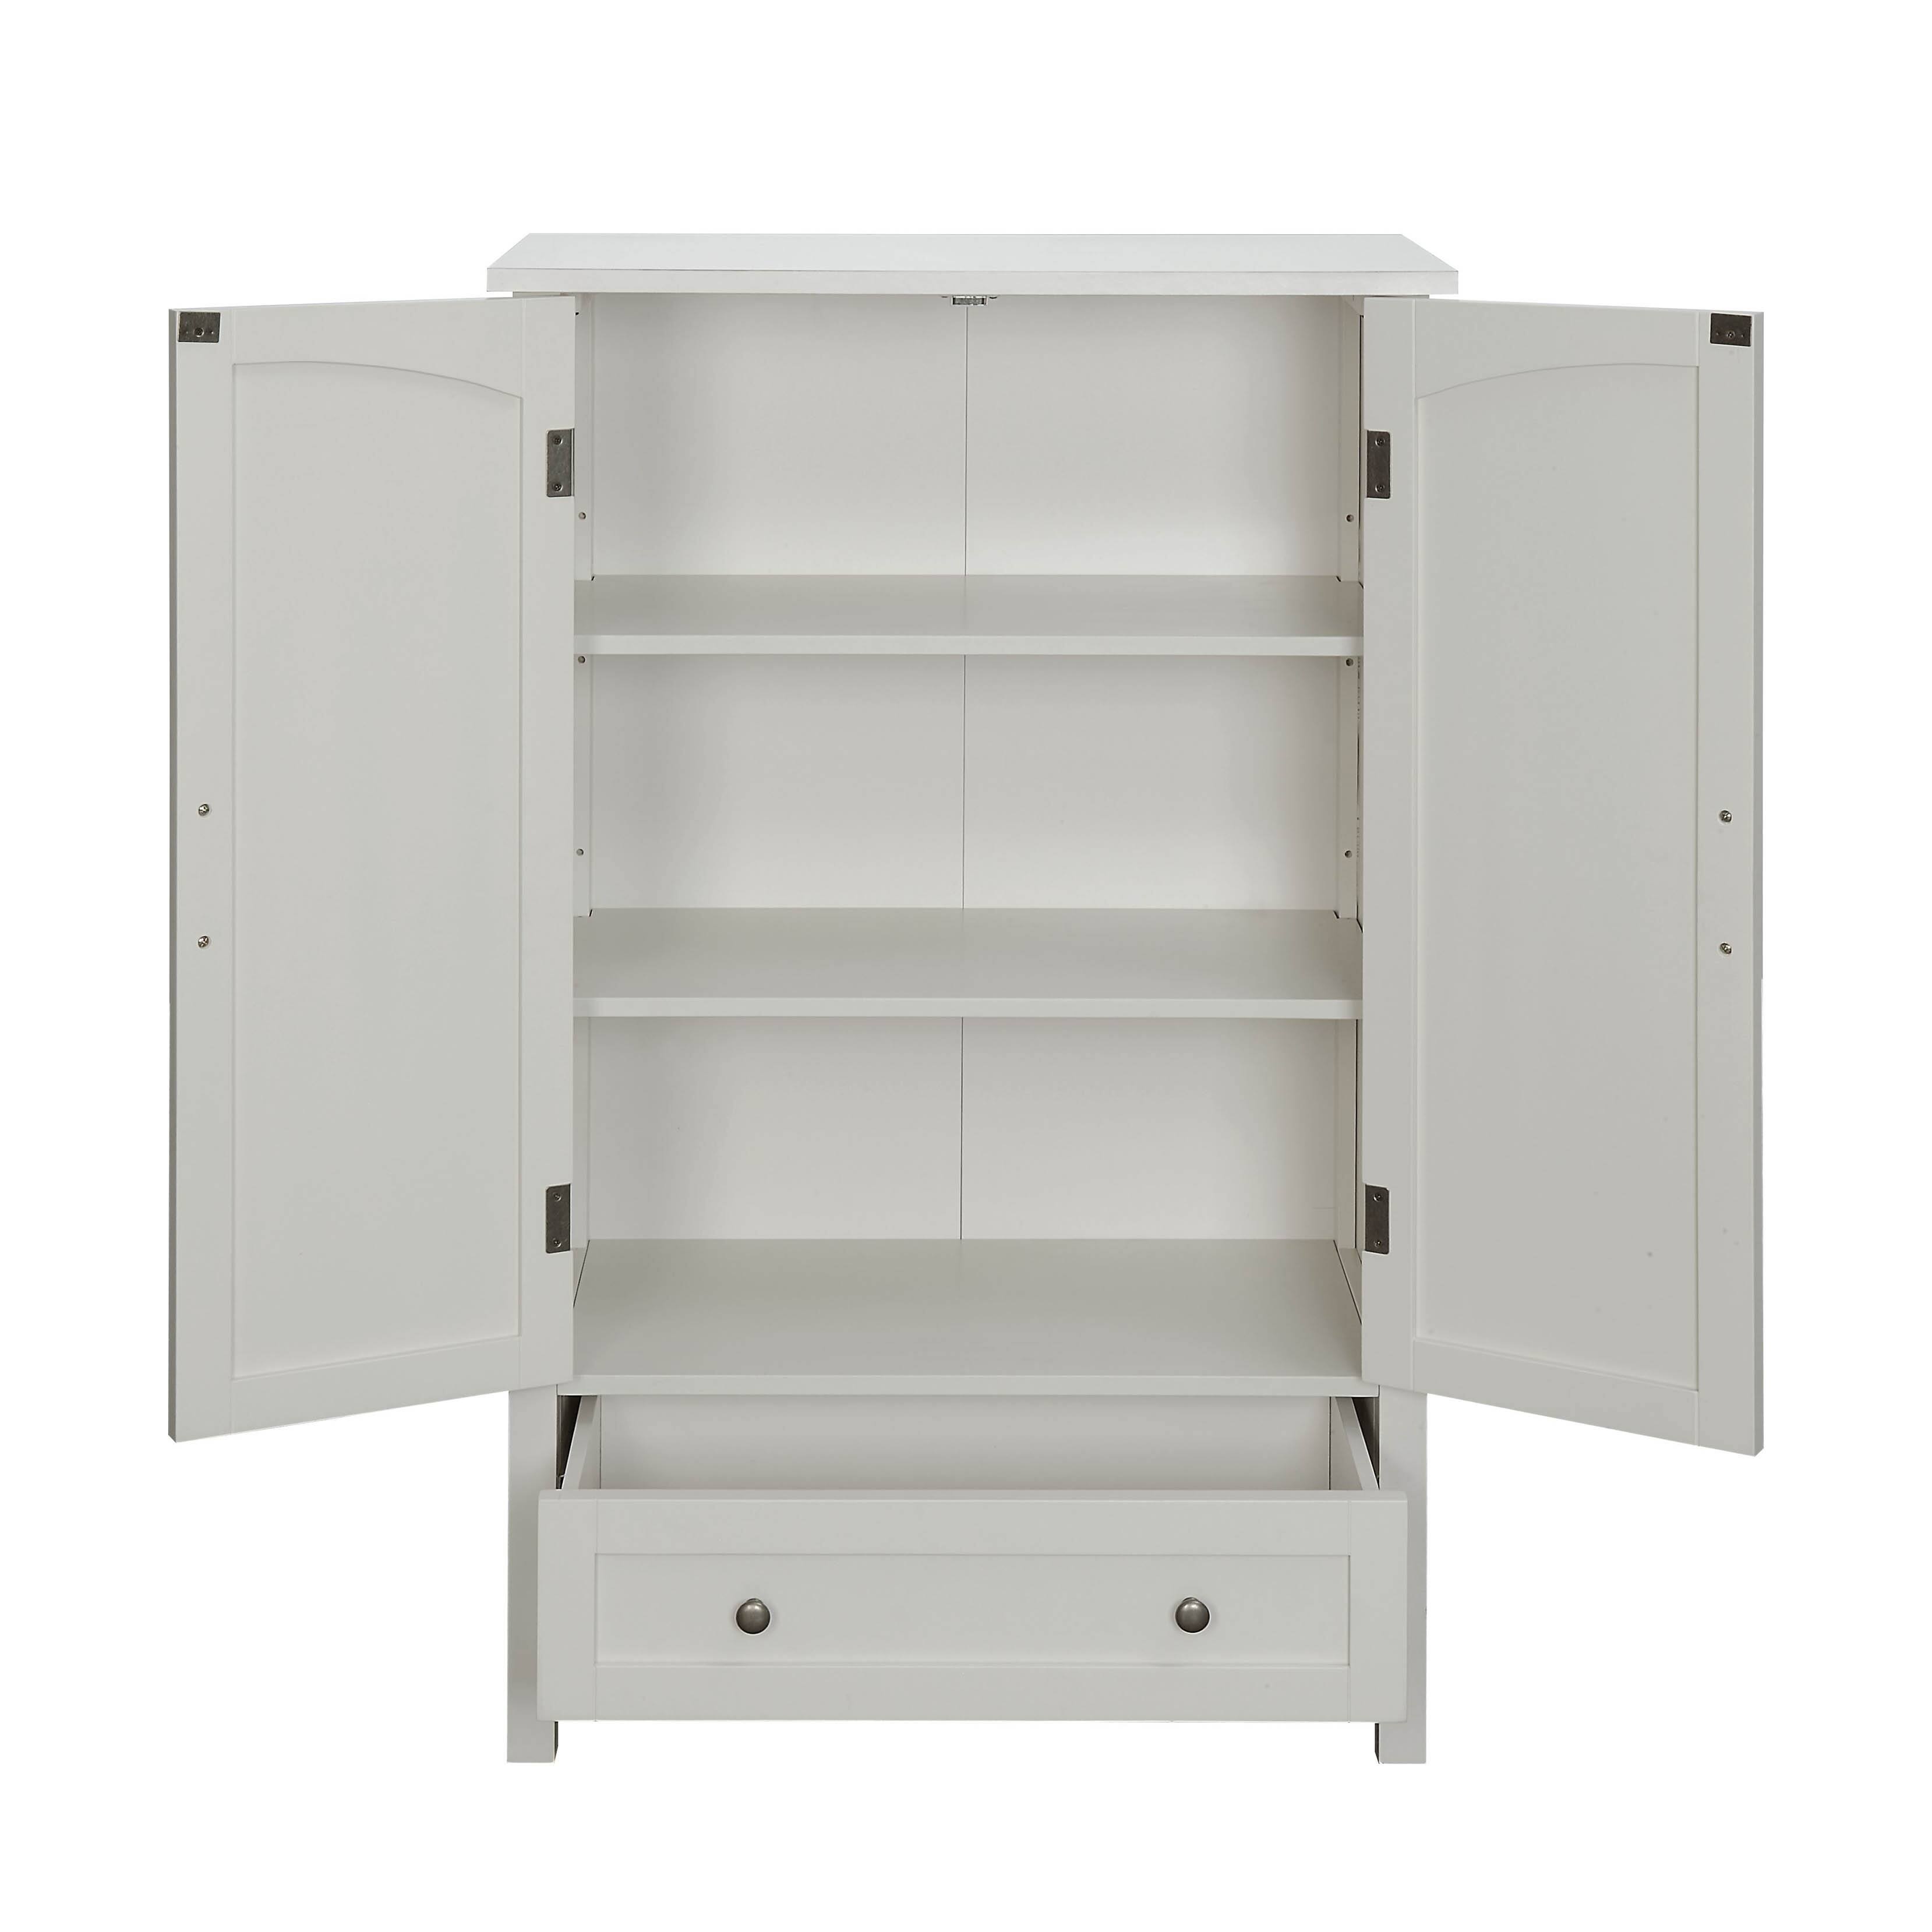 Pantry with Drawer 28"Lx14"Wx45"H. By Belray - Off-White